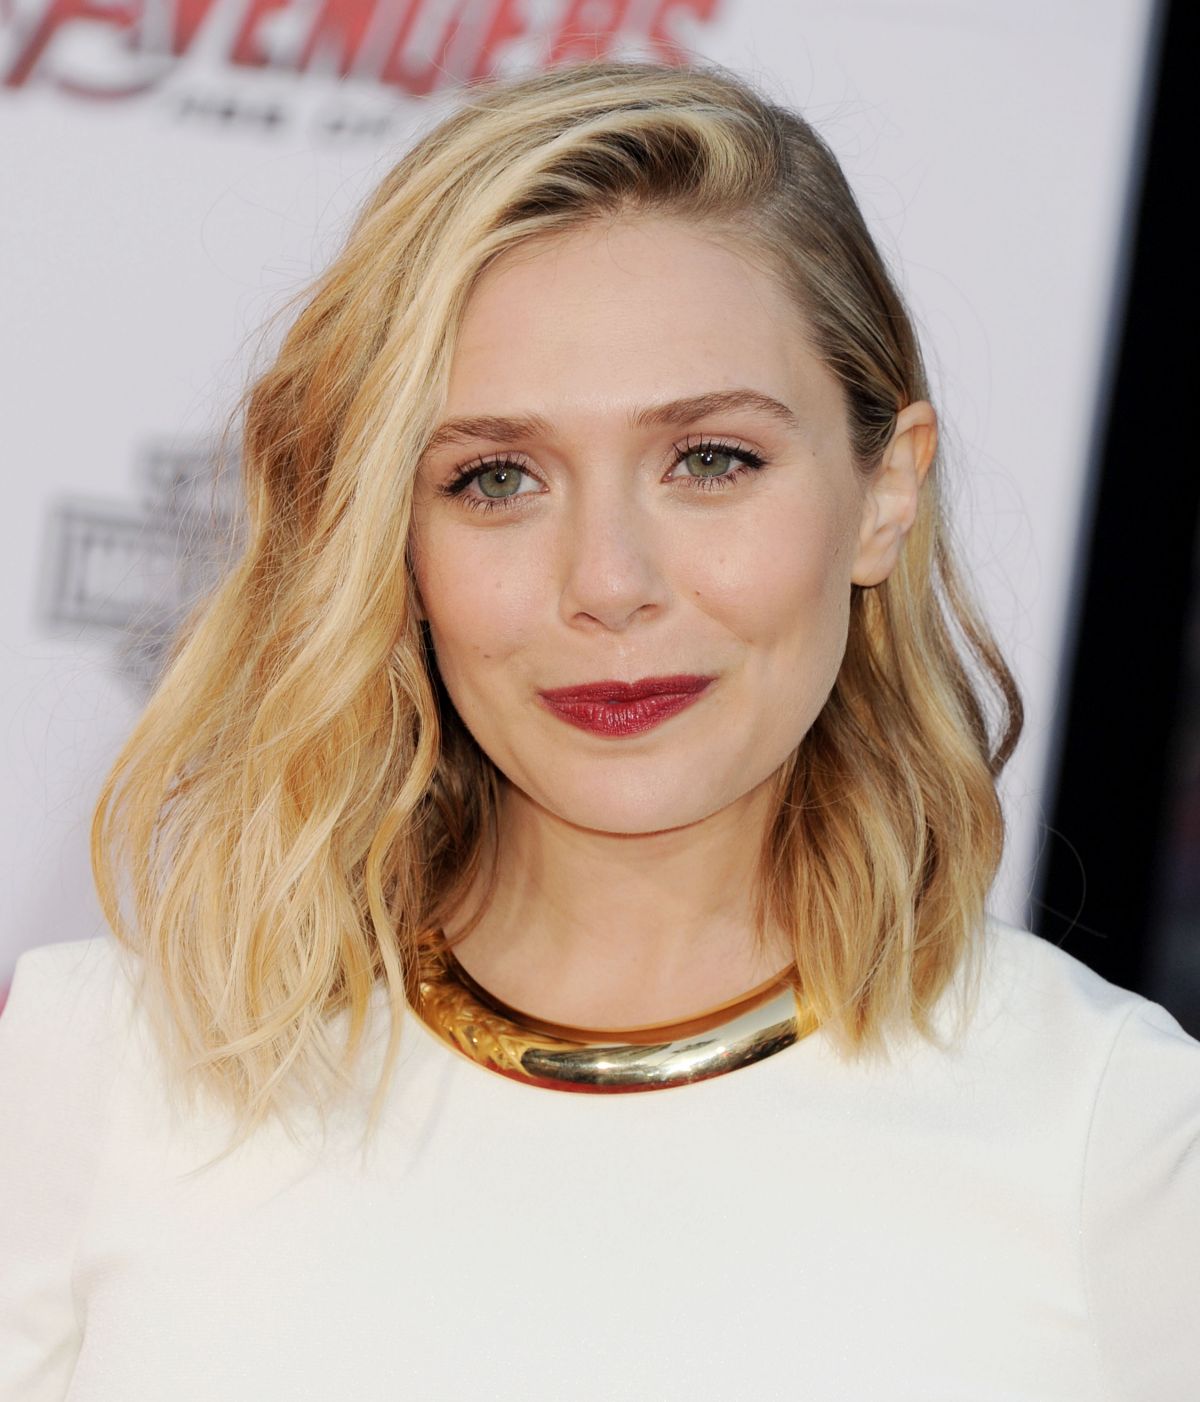 ELIZABETH OLSEN at Avengers: Age of Ultron Premiere in Hollywood